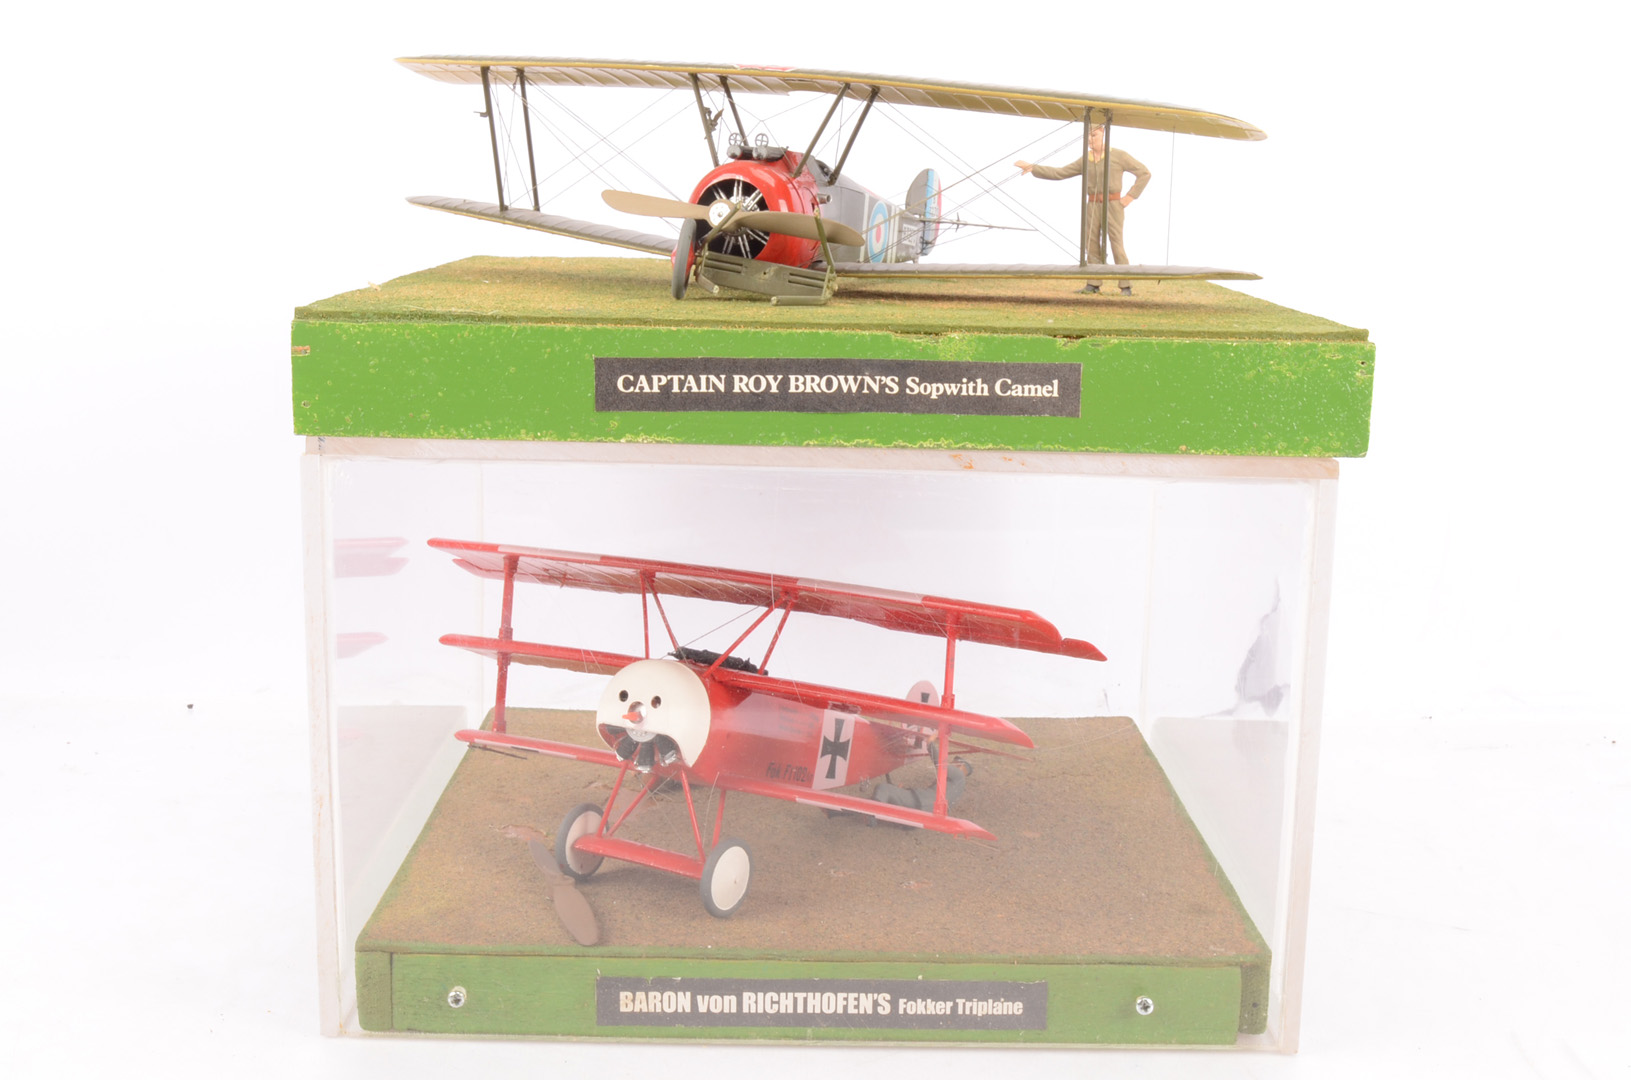 WWI and Modern Aircraft Models, four scratch built large scale wooden models, constructed to a